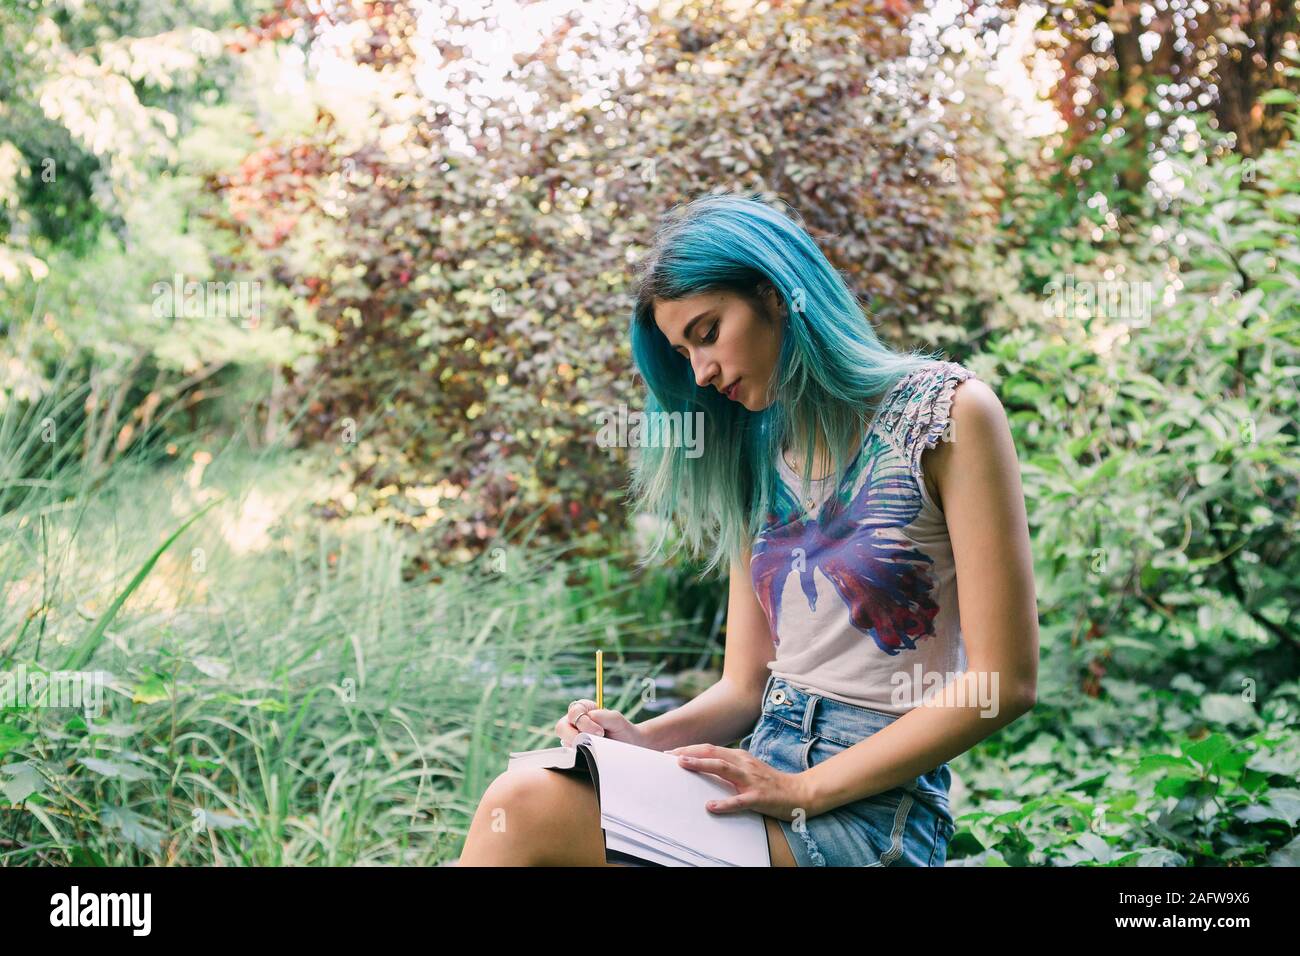 Young woman with blue hair writing in journal in park Stock Photo